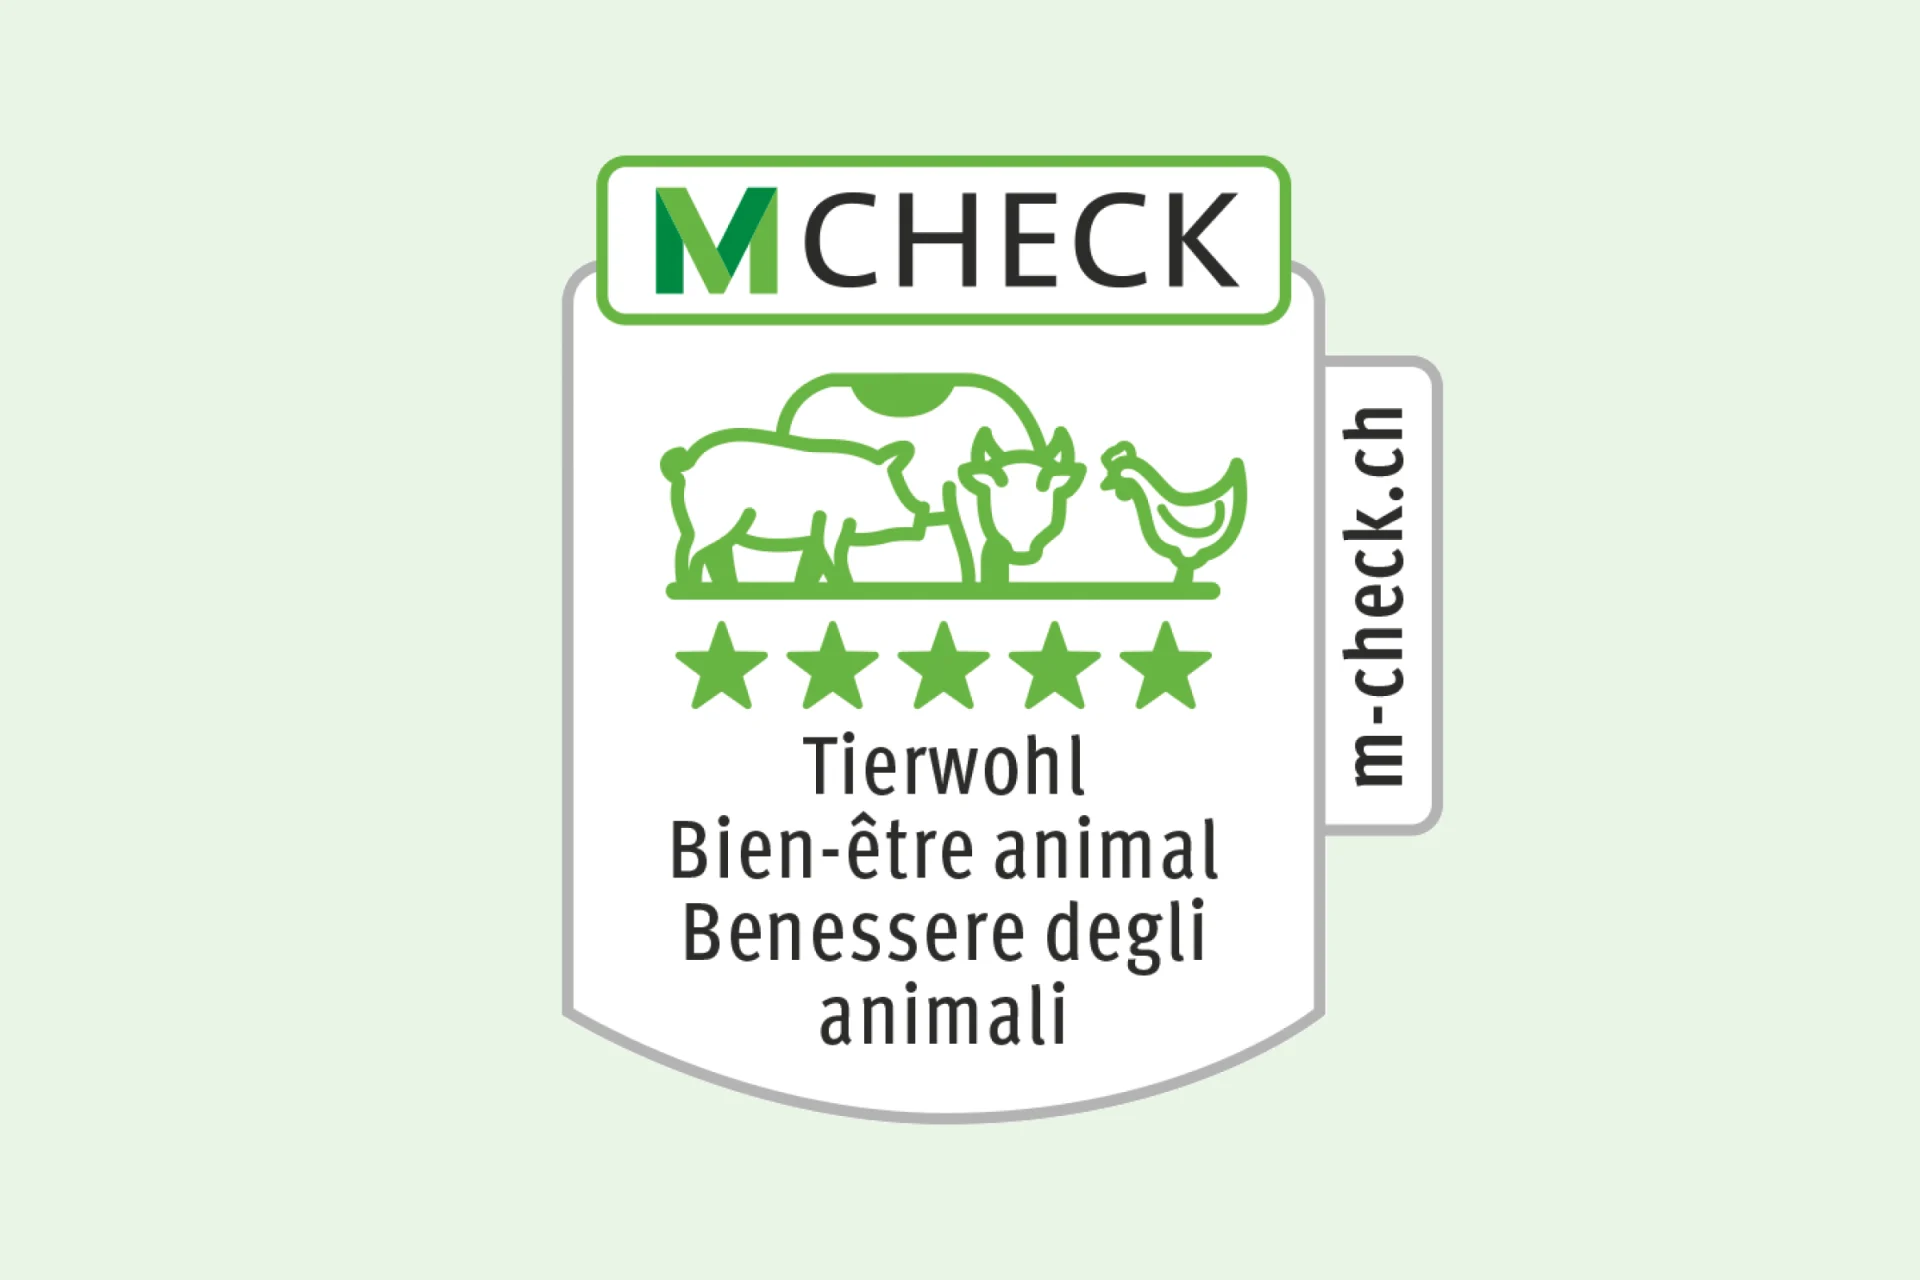 M-Check graphic on animal welfare with five stars.